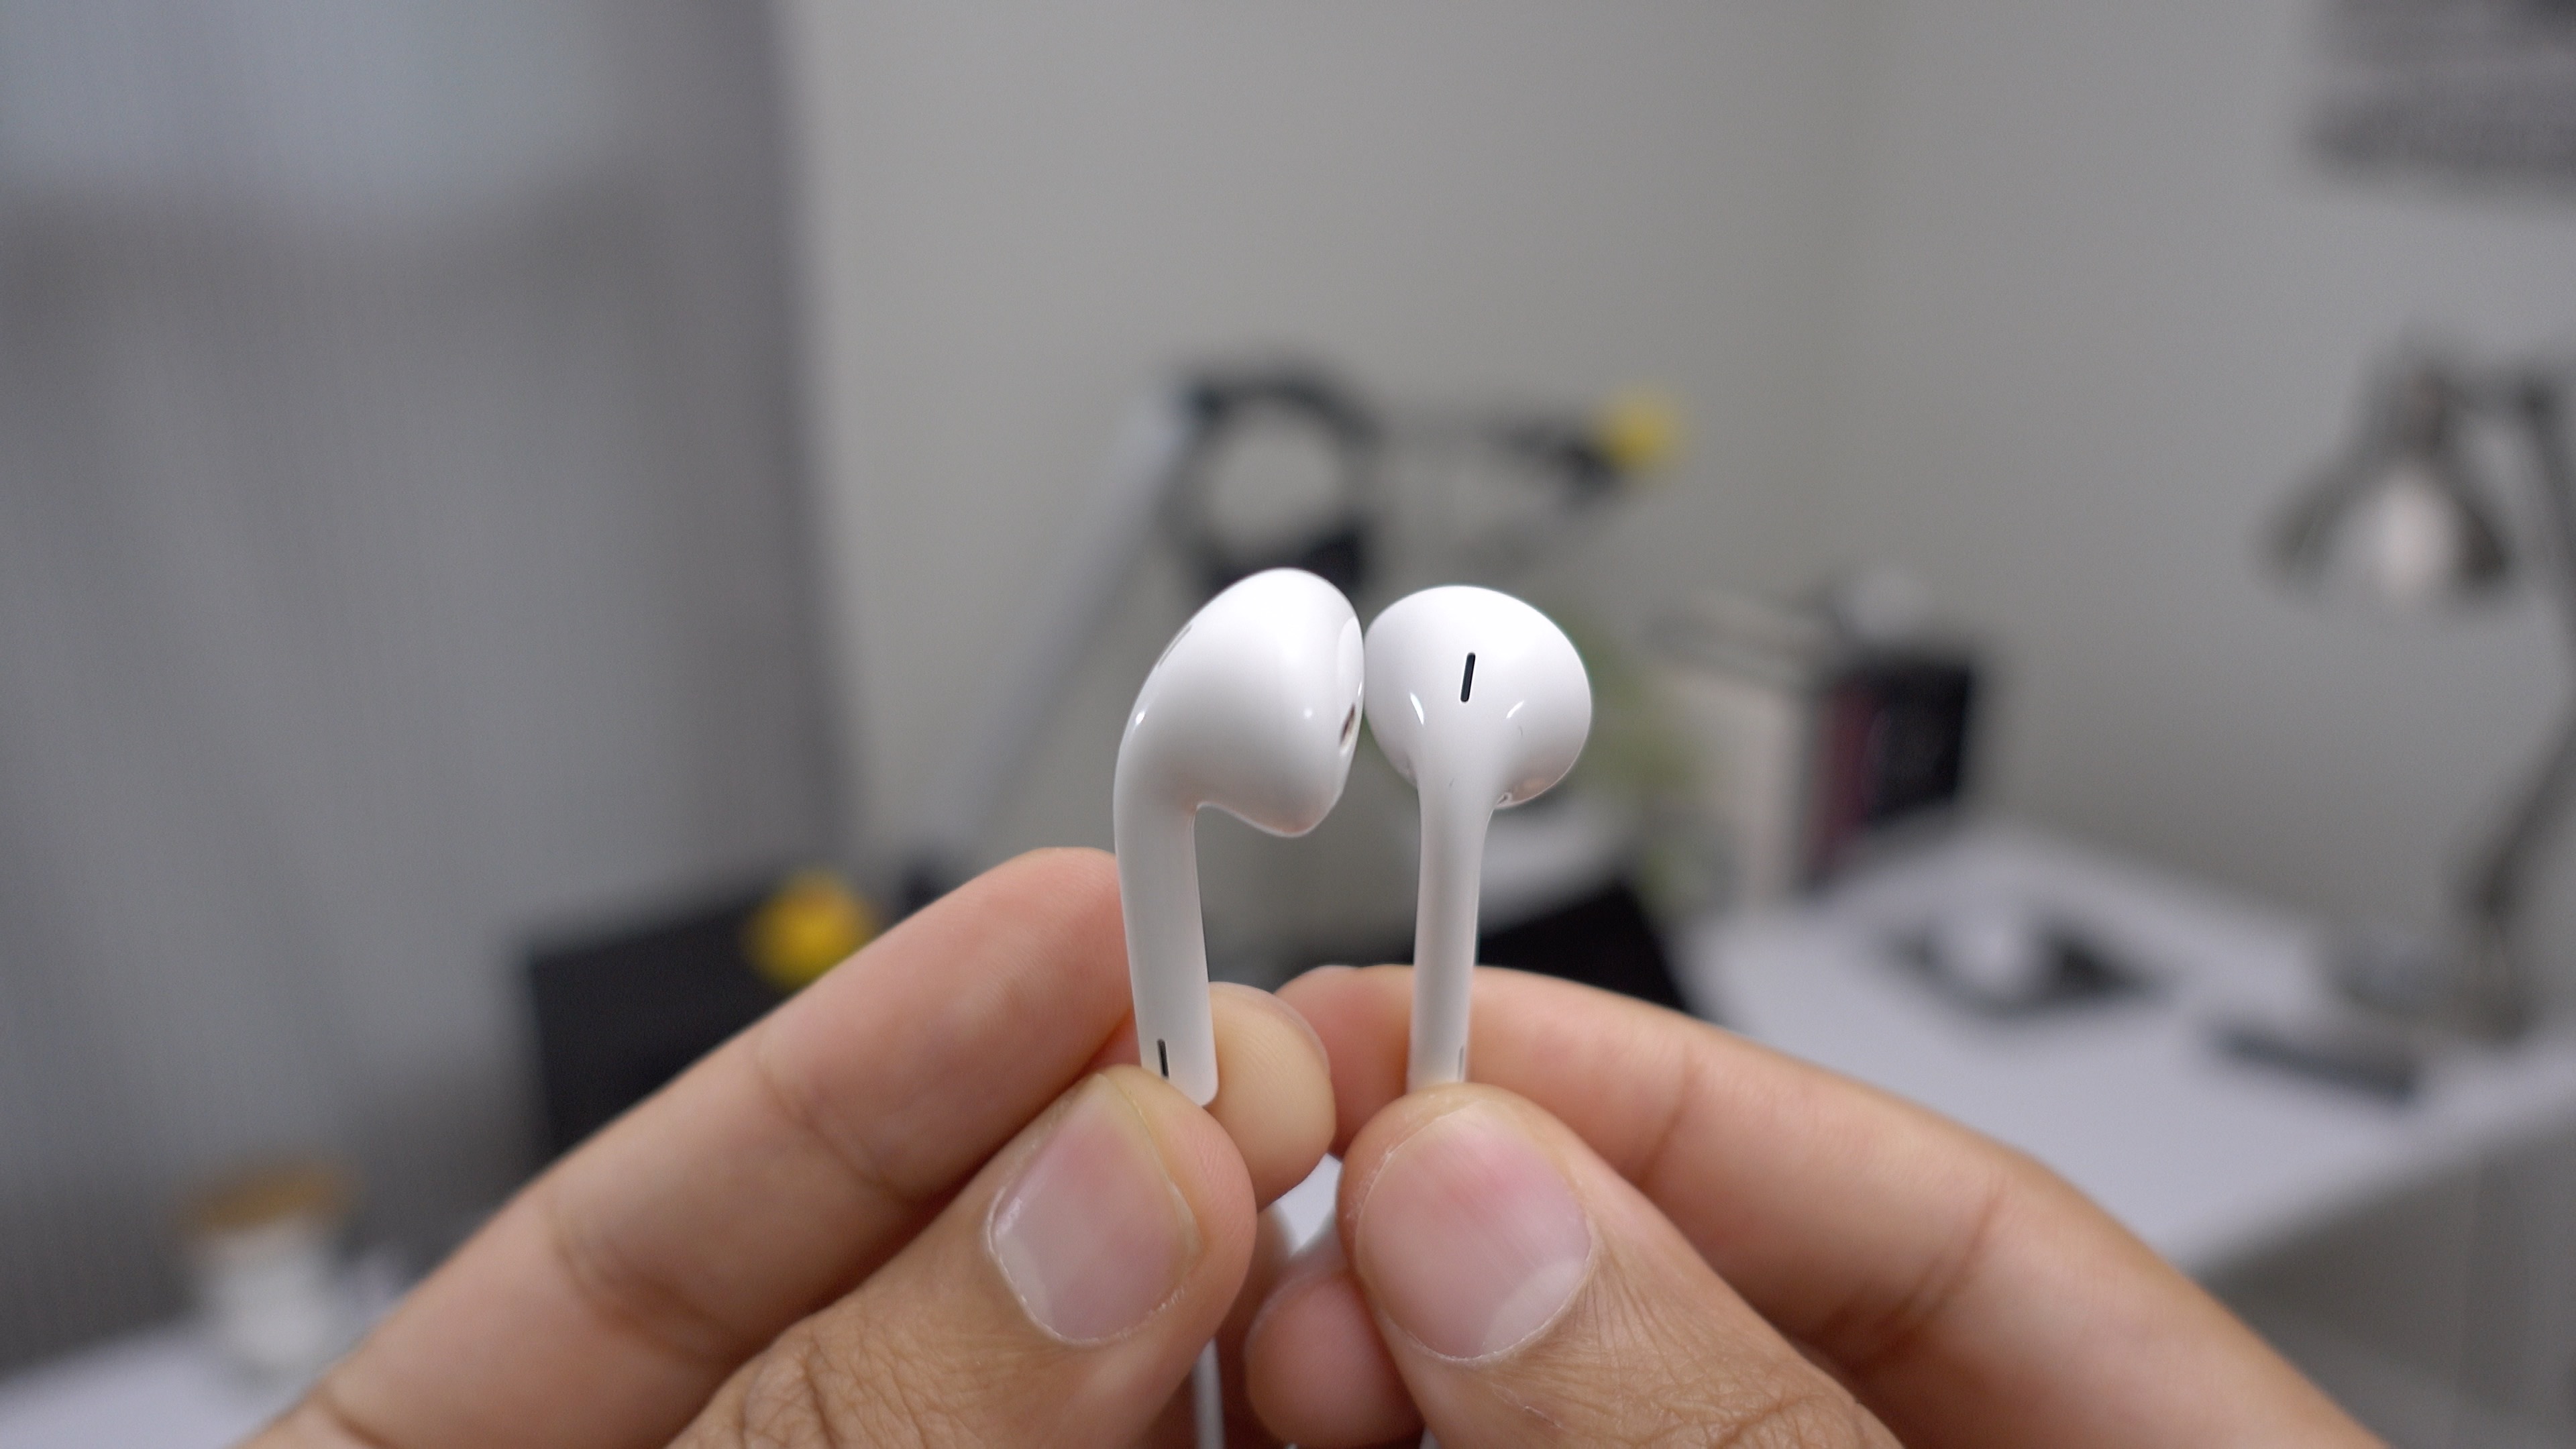 Hands-on: How the new Lightning EarPods compare to the old 3.5mm EarPods [Video] -